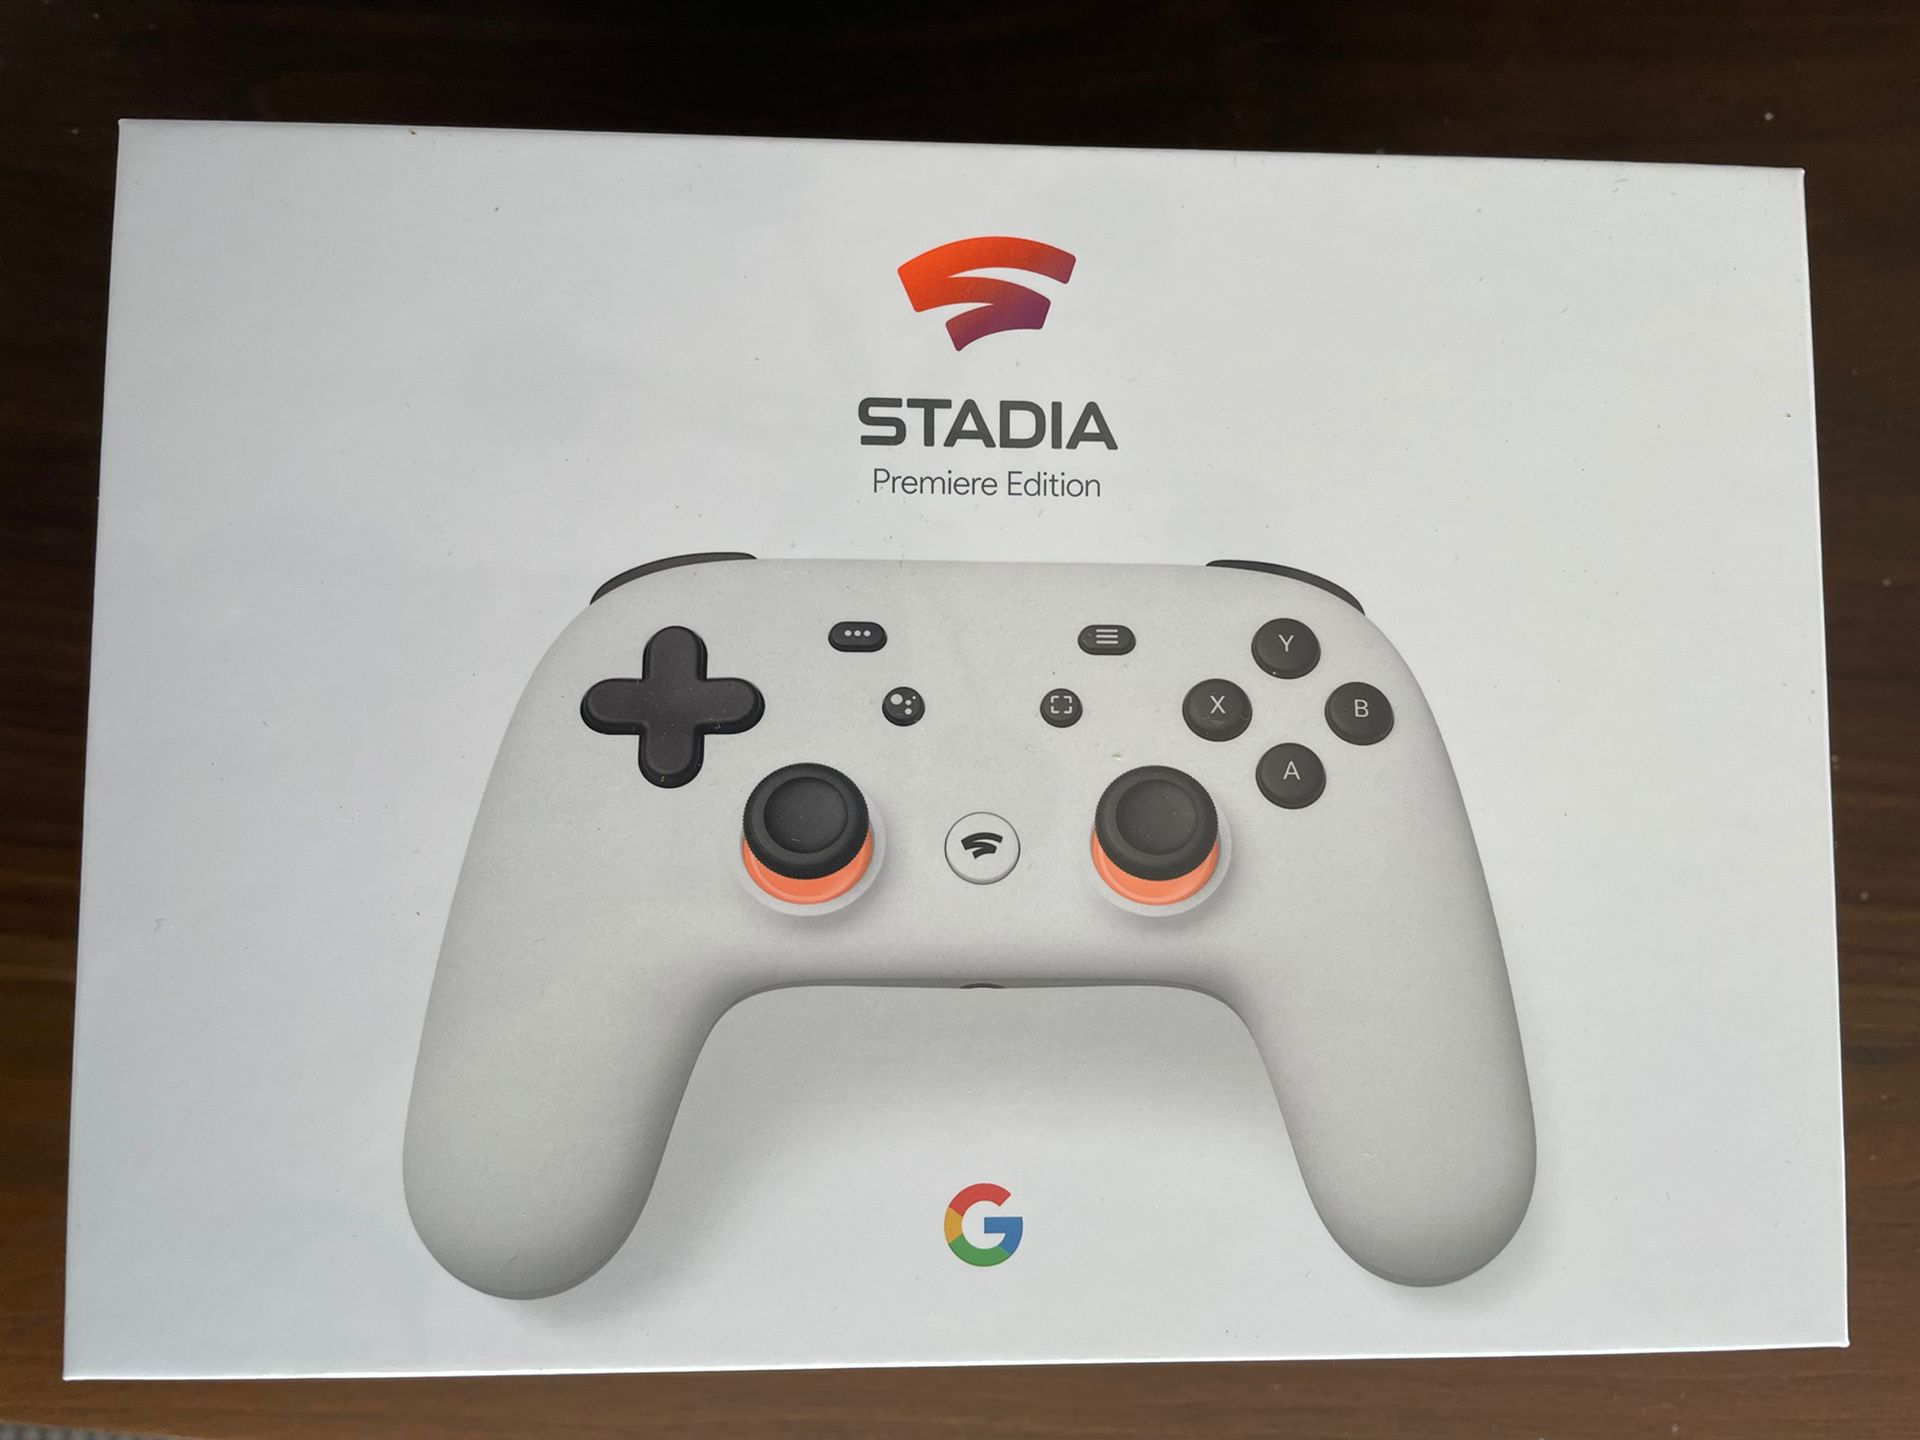 Google Stadia Premiere Edition - New and Sealed